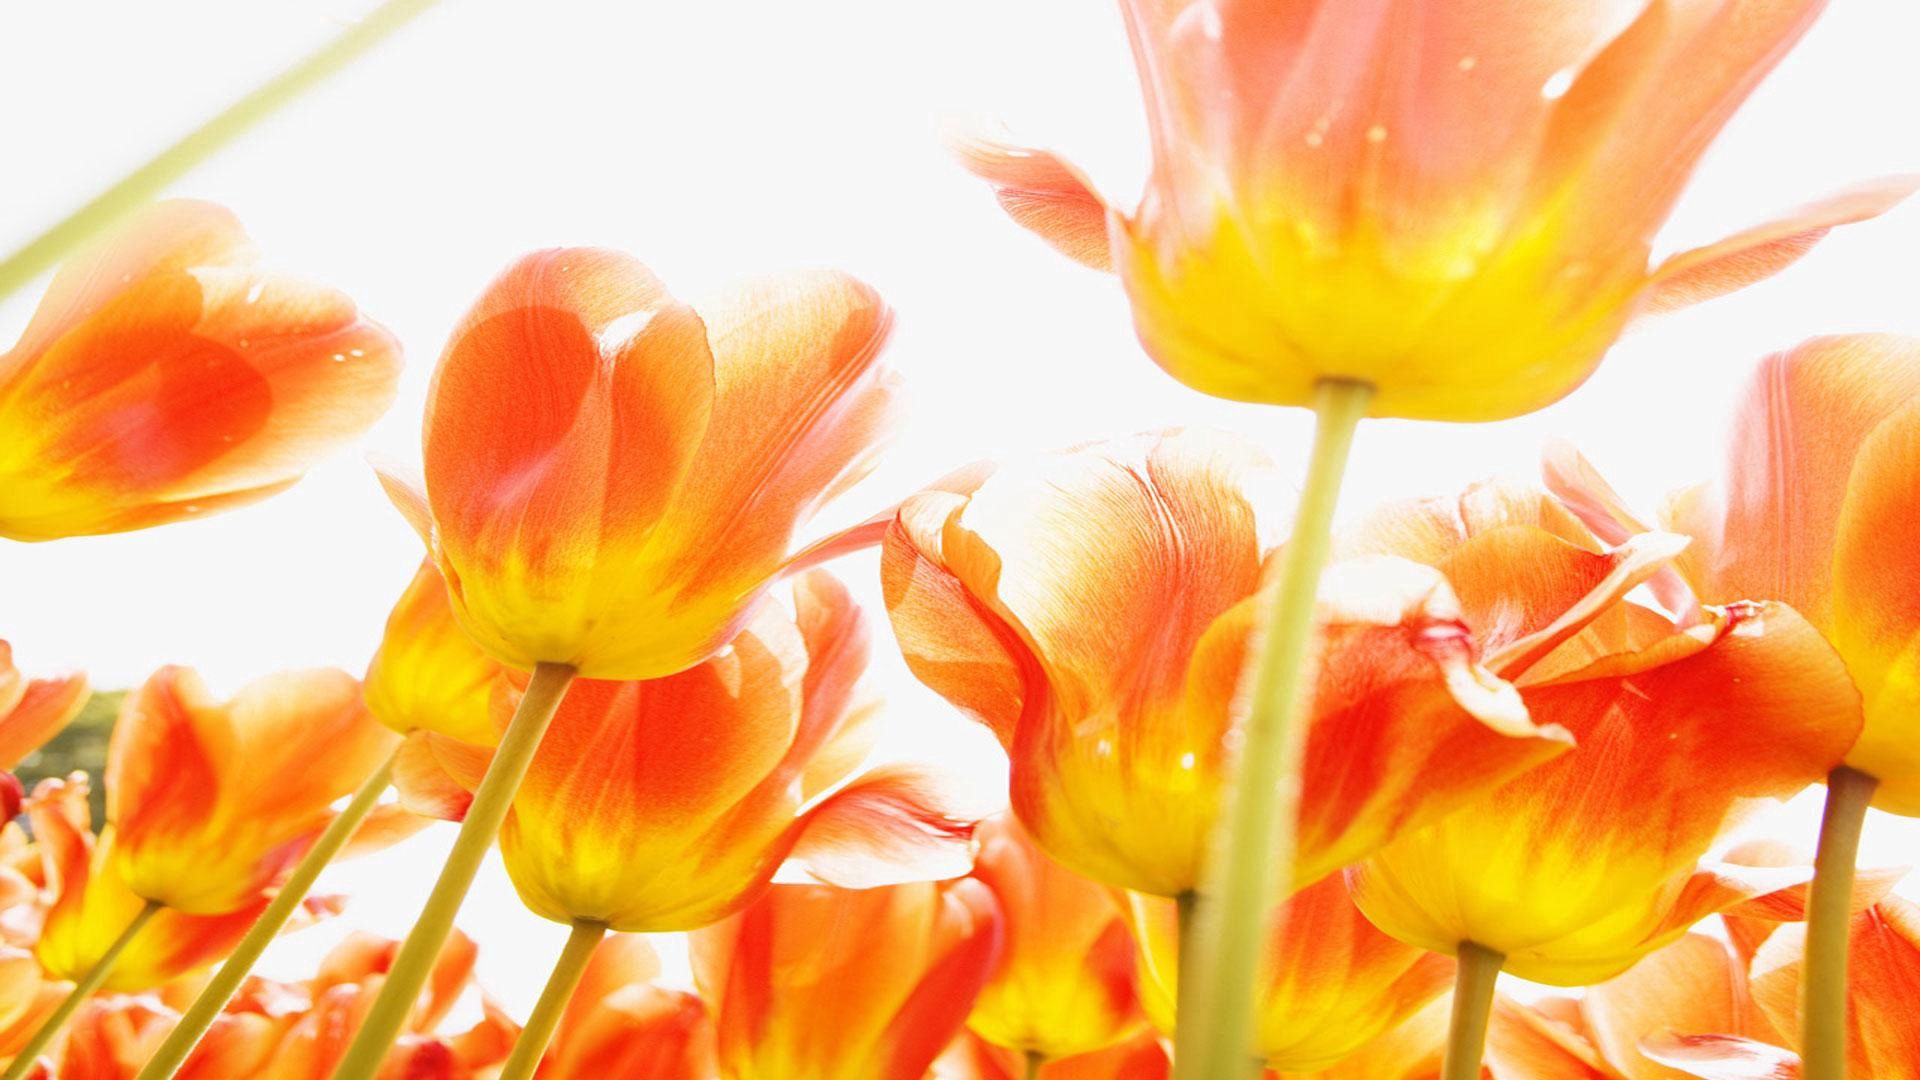 148788 download wallpaper tulips, flowers, shine, light, bright screensavers and pictures for free